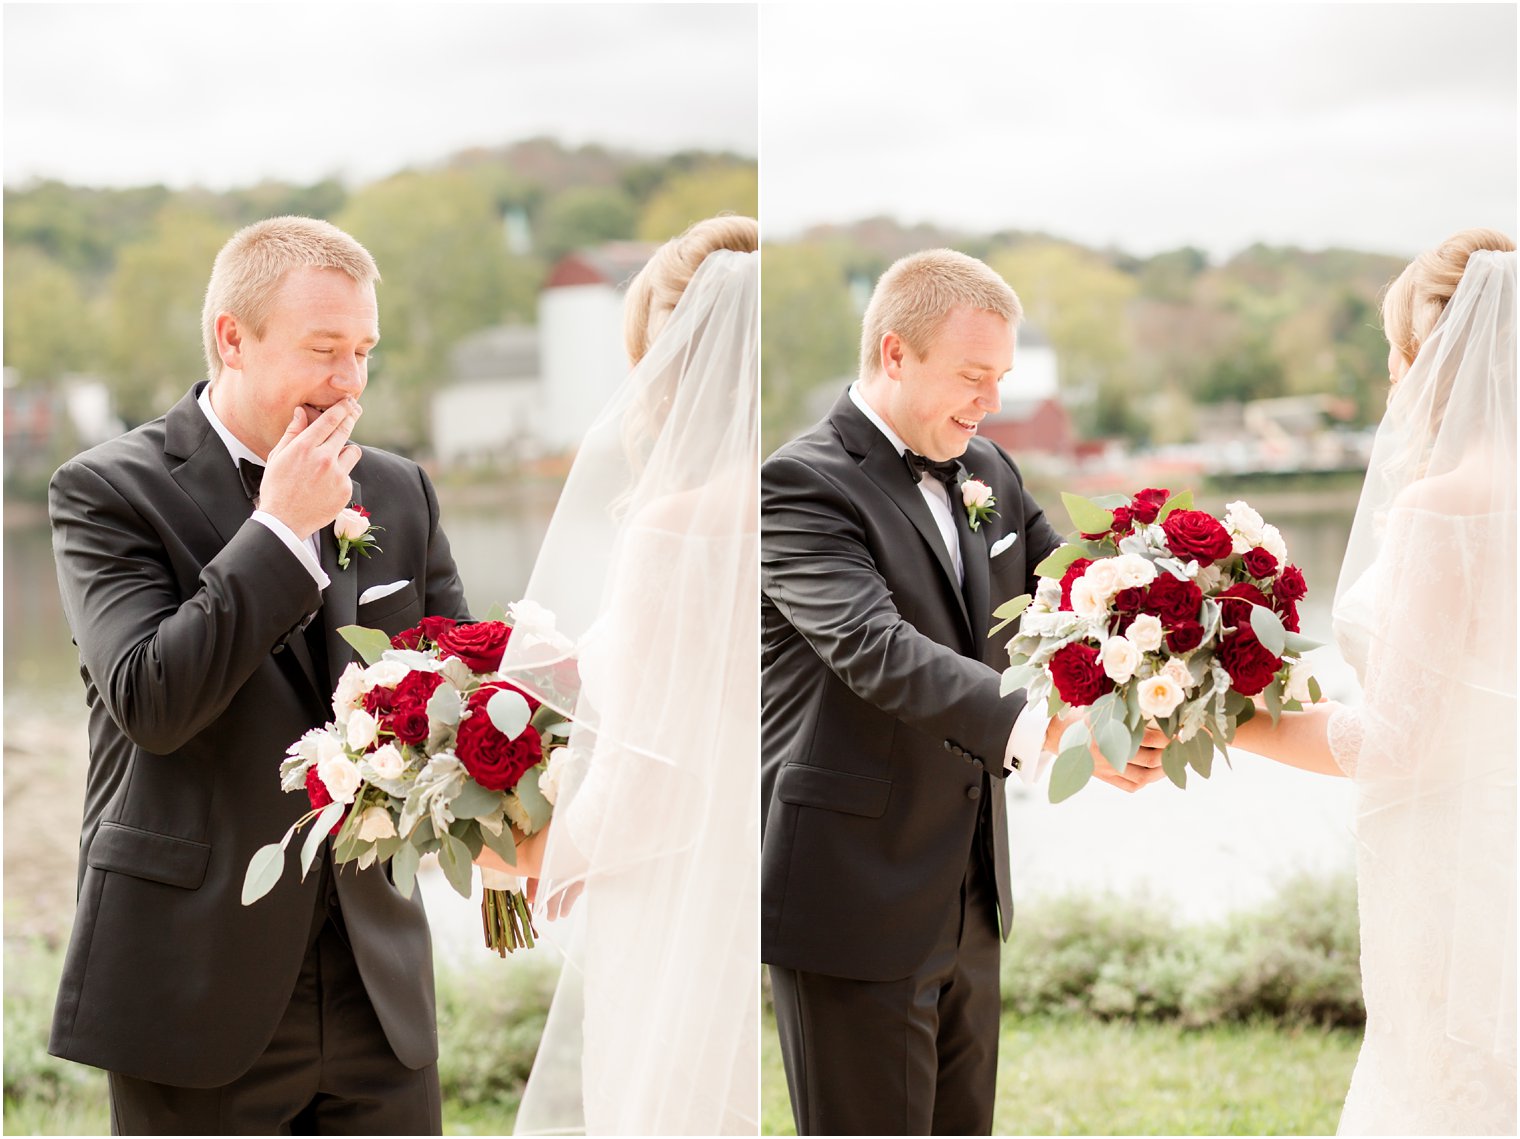 Groom's surprise seeing his bride on their wedding day